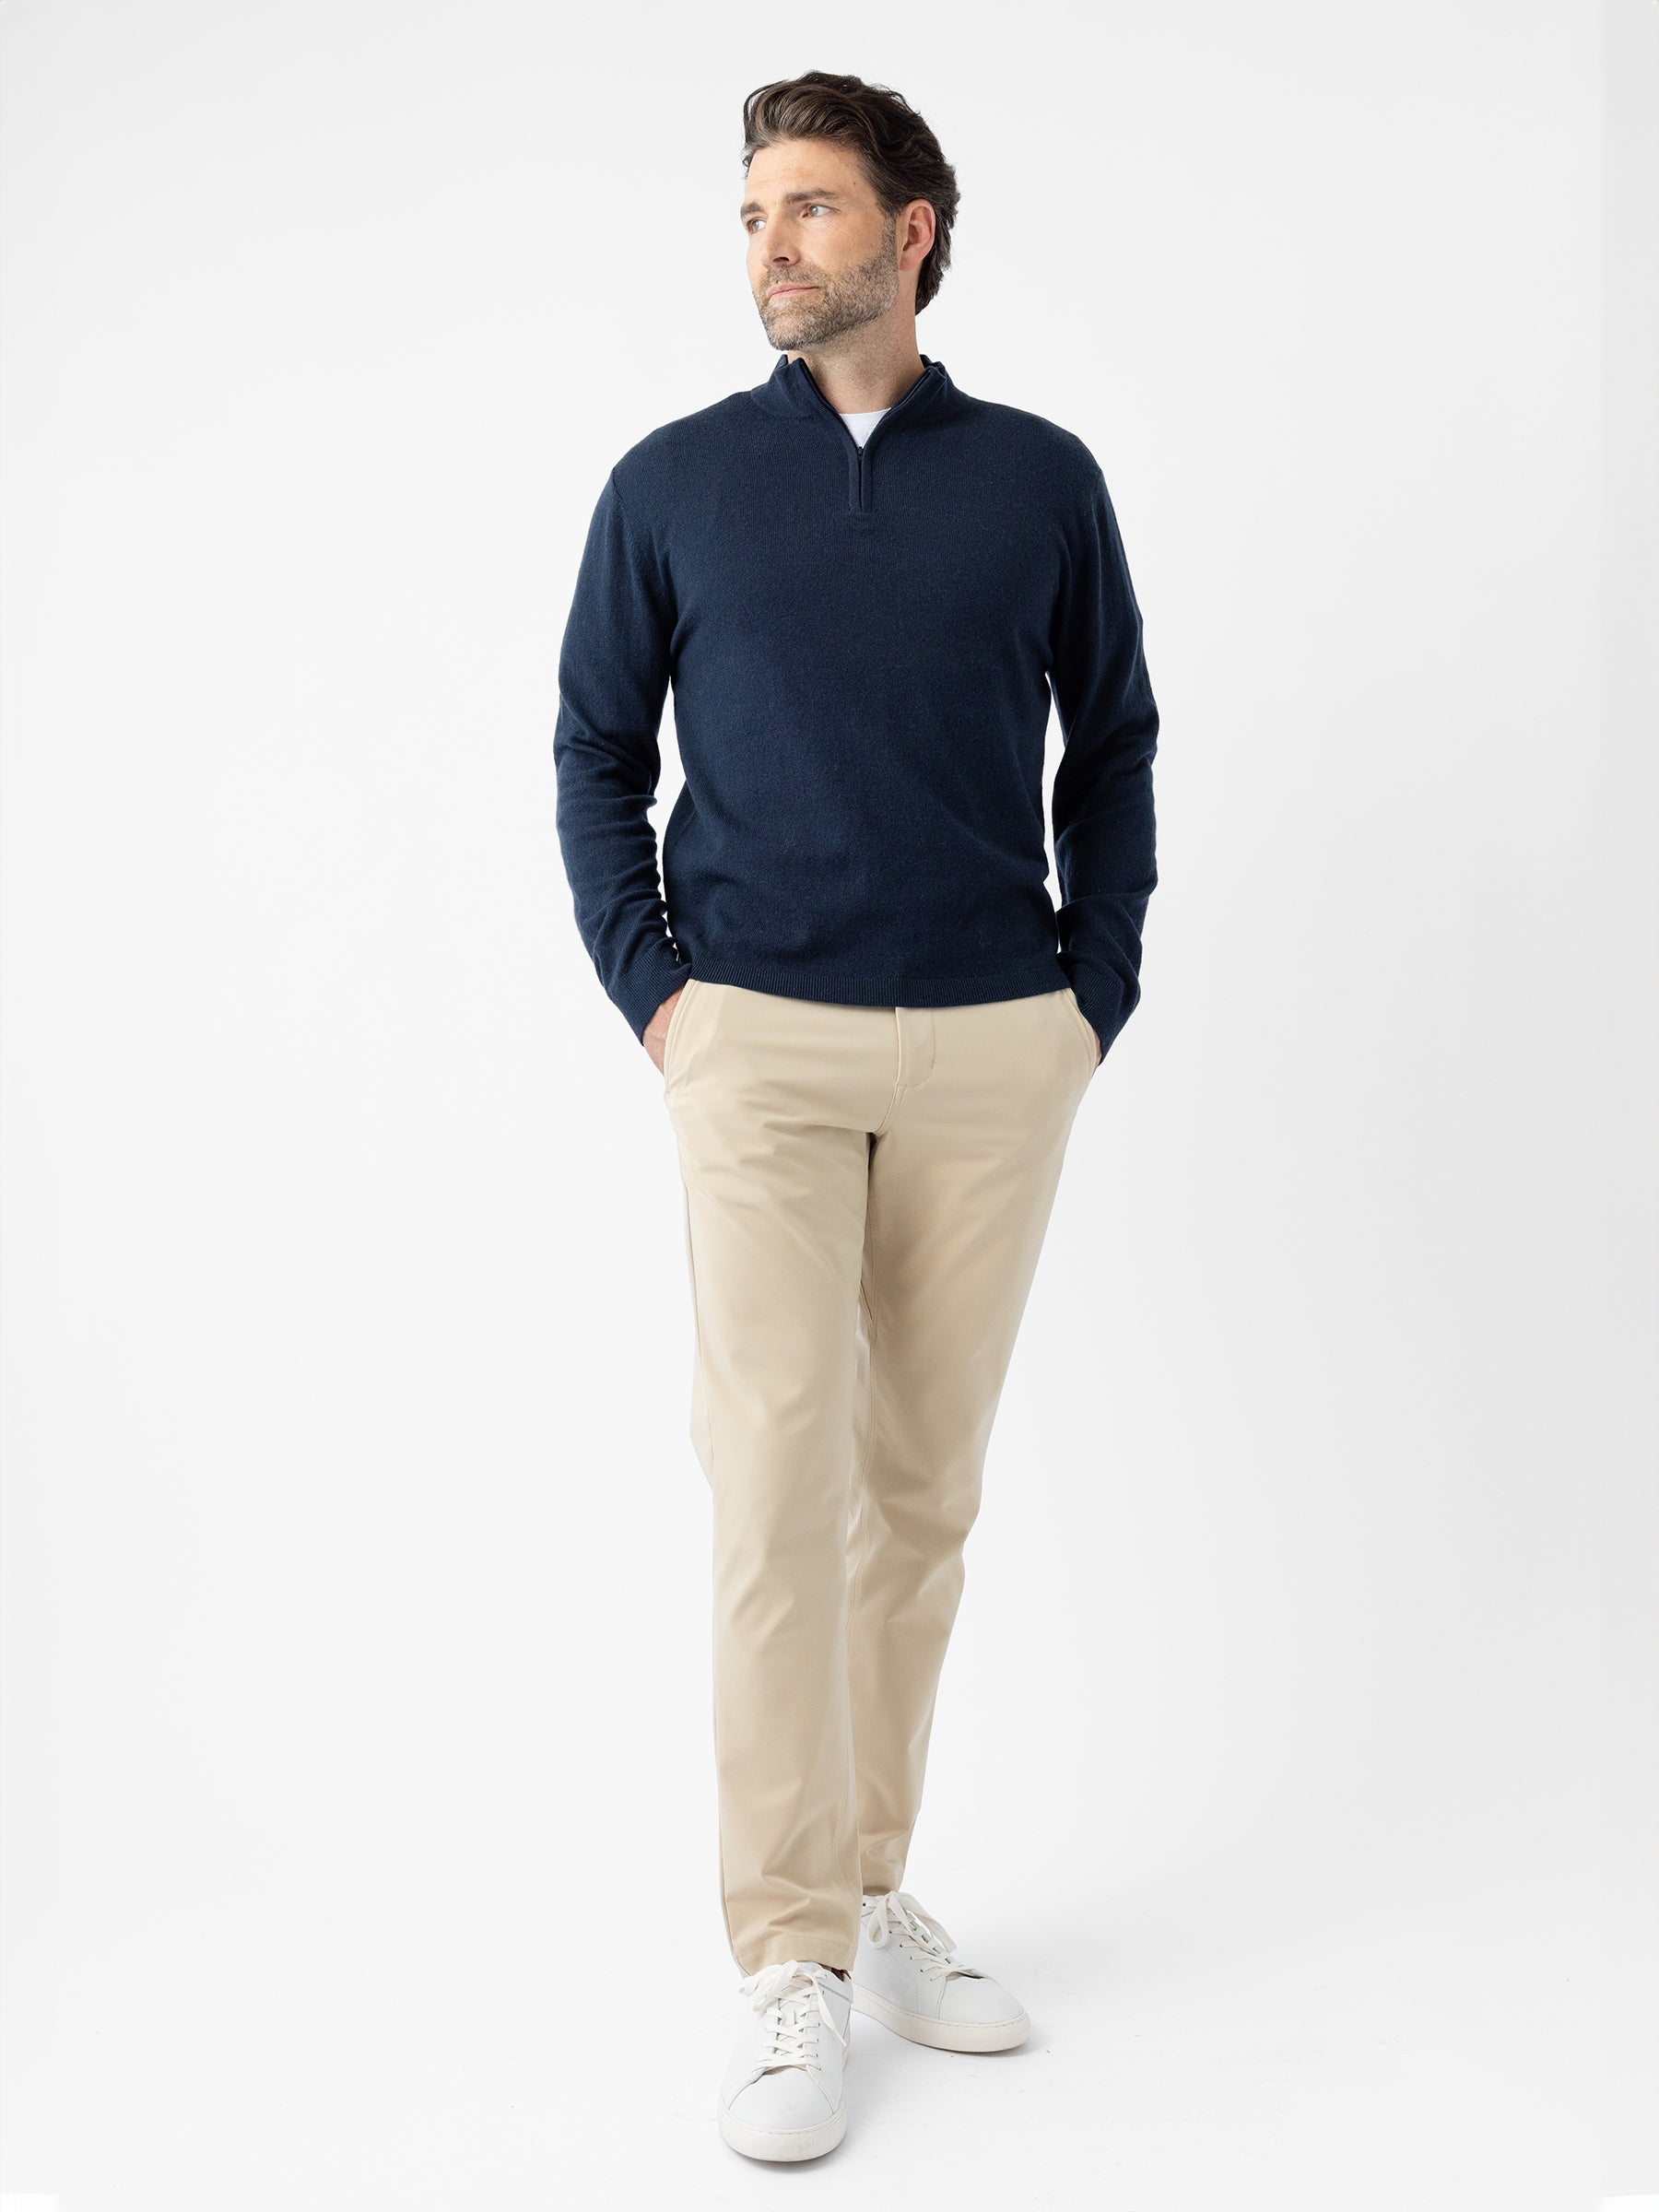 A man stands against a plain white background wearing Cozy Earth's Men's Quarter Zip Sweater in dark blue, along with beige pants and white sneakers. His hands are in his pockets as he gazes slightly to his right. |Color:Eclipse